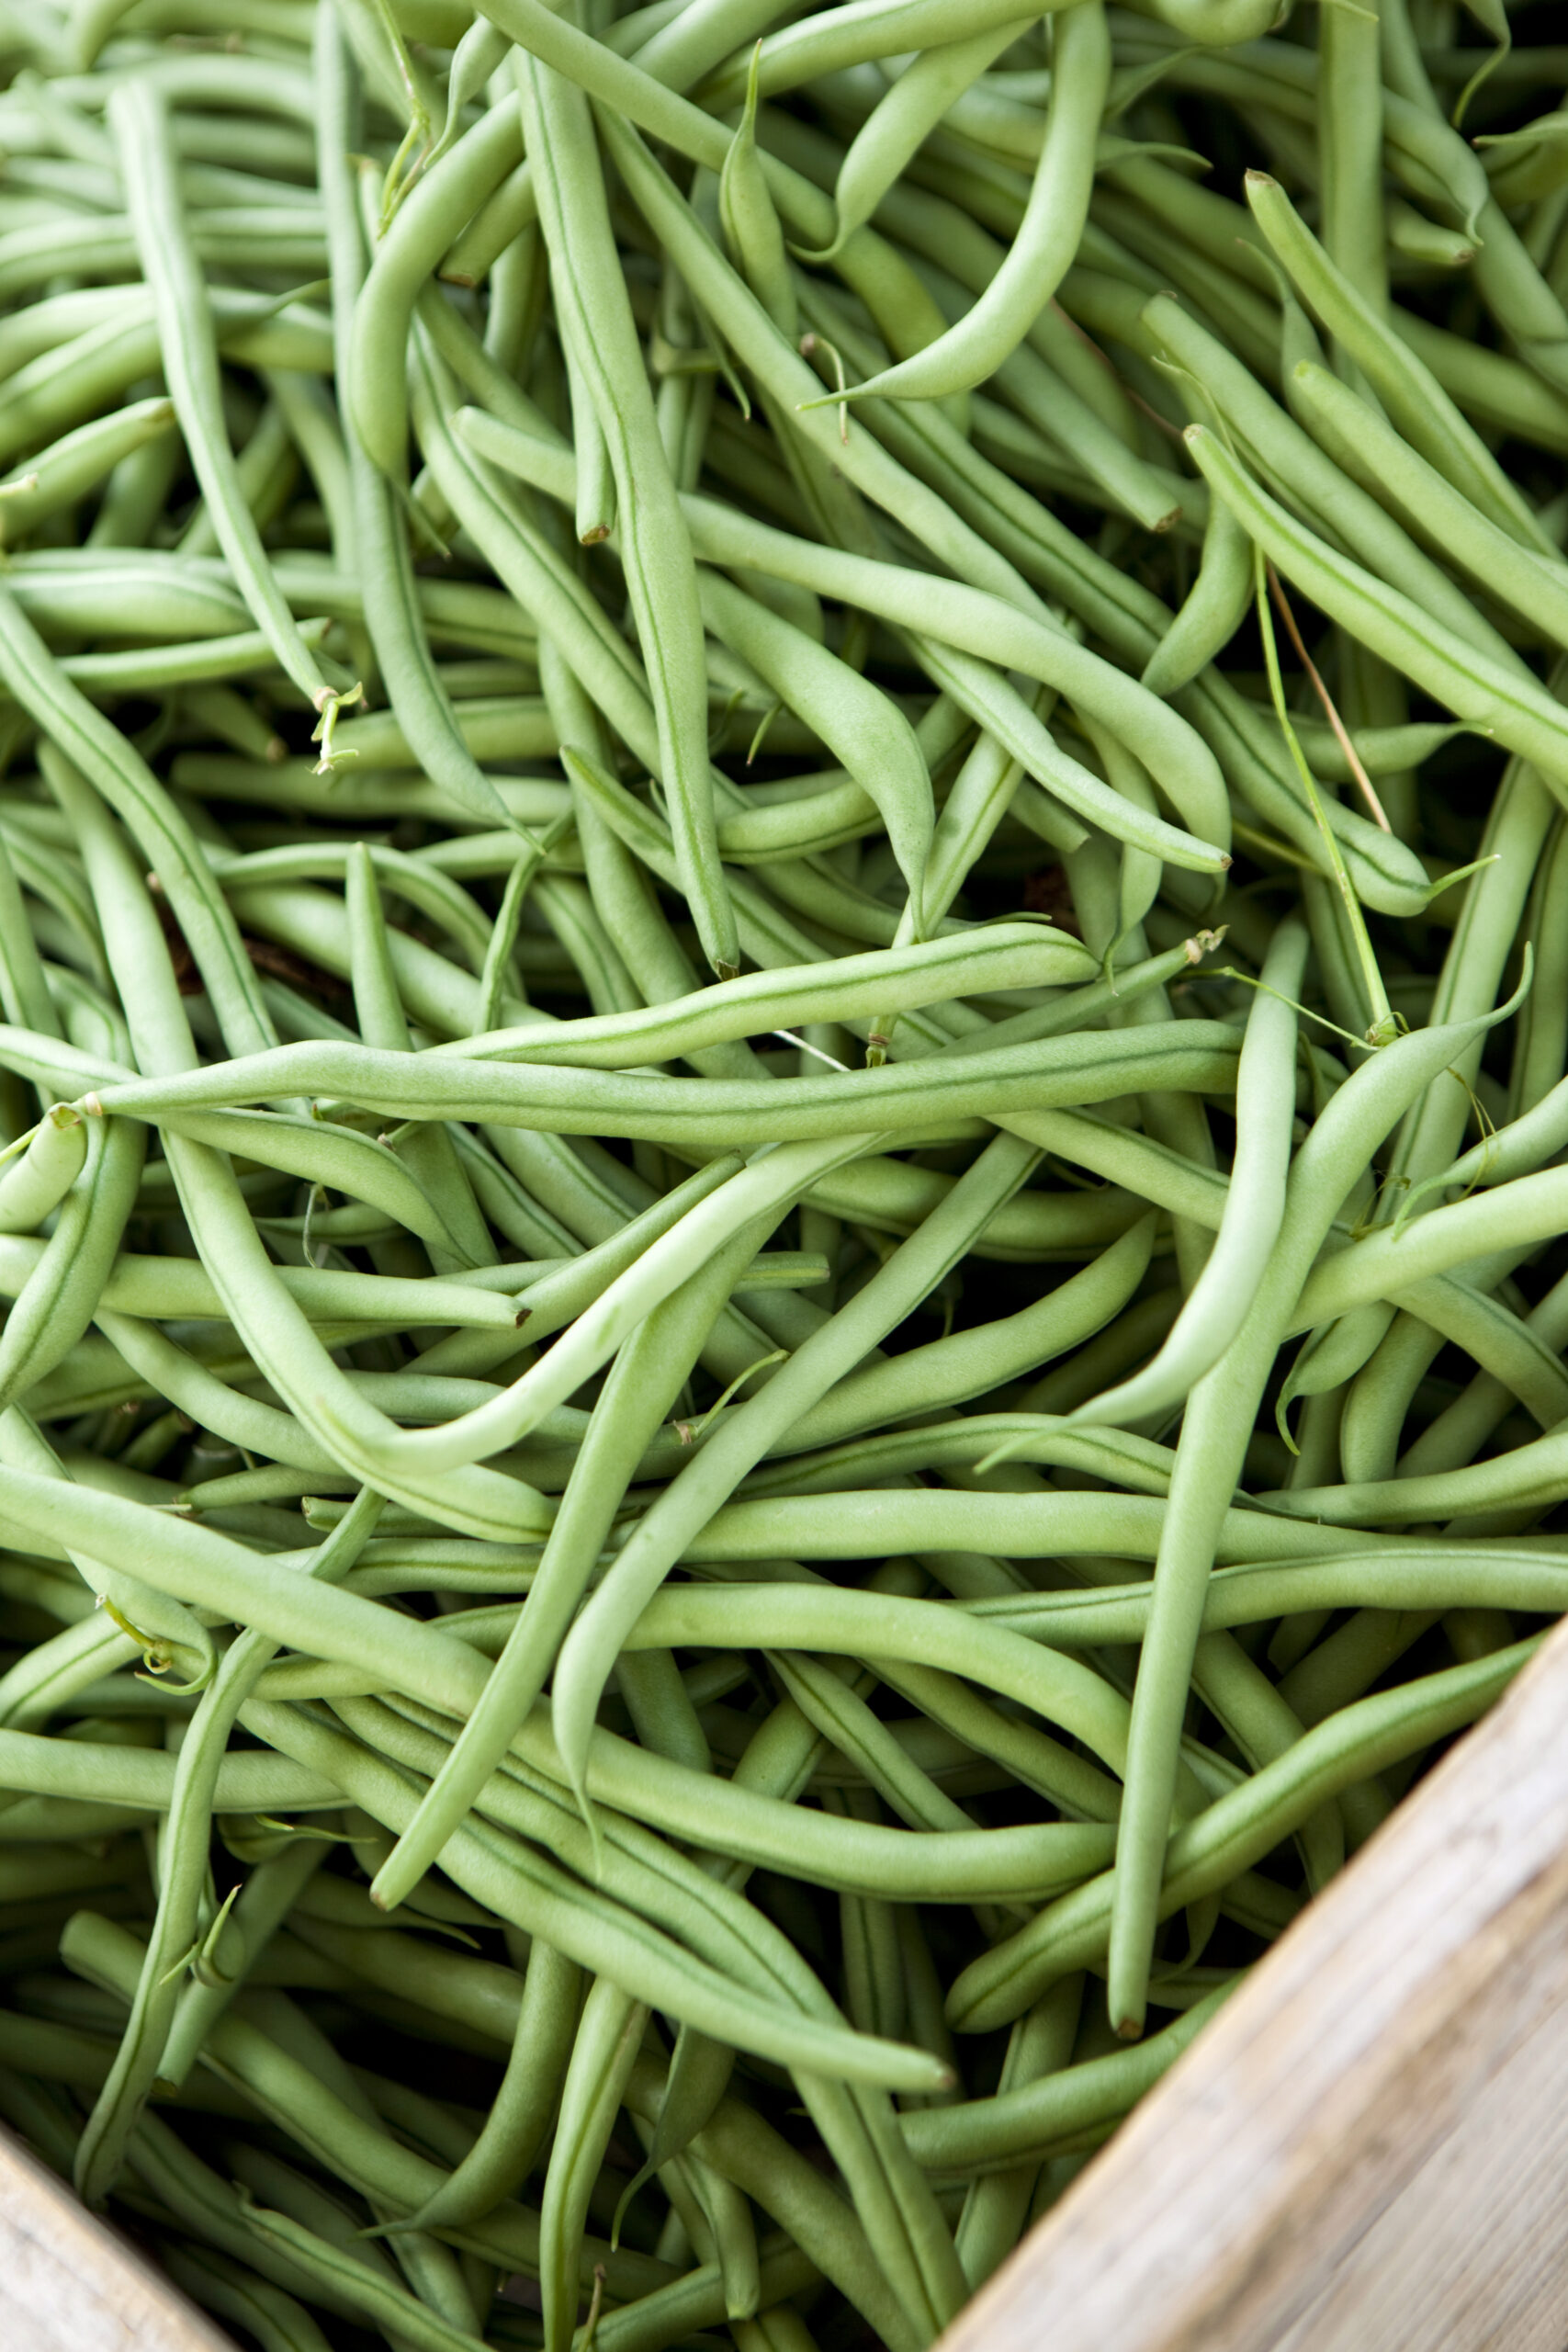 Background of green beans on a stall